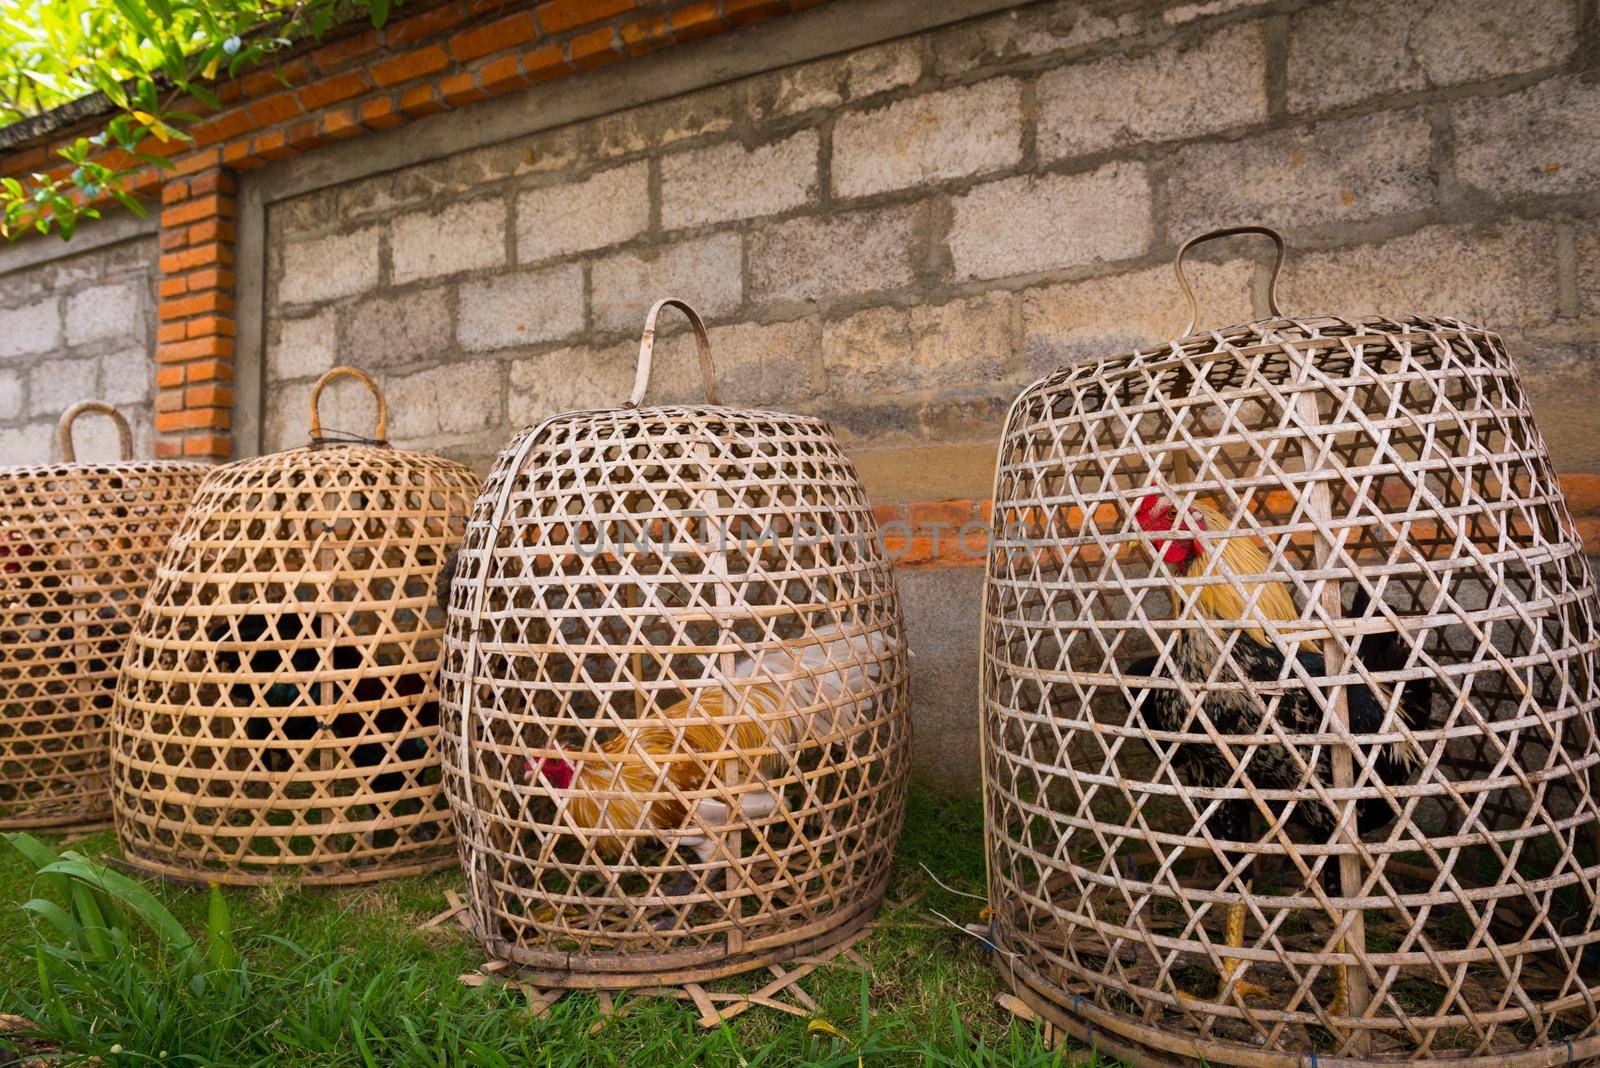 Fighter cocks in cages ready for action